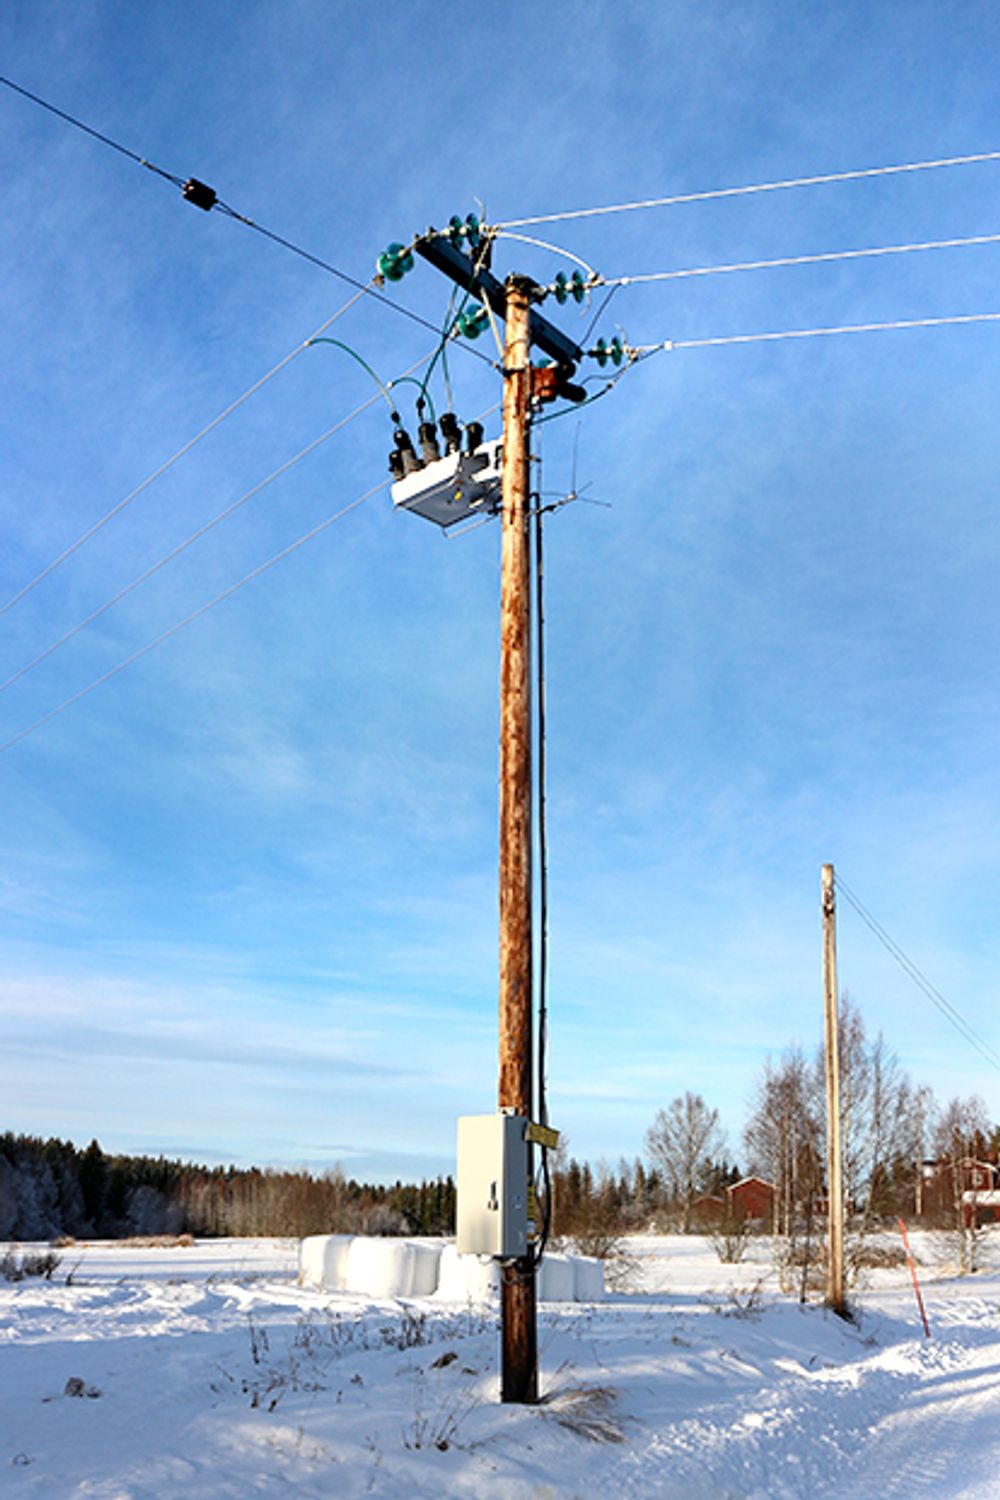 NOJA Power OSM Recloser Installation in Sweden, surrounded by snow